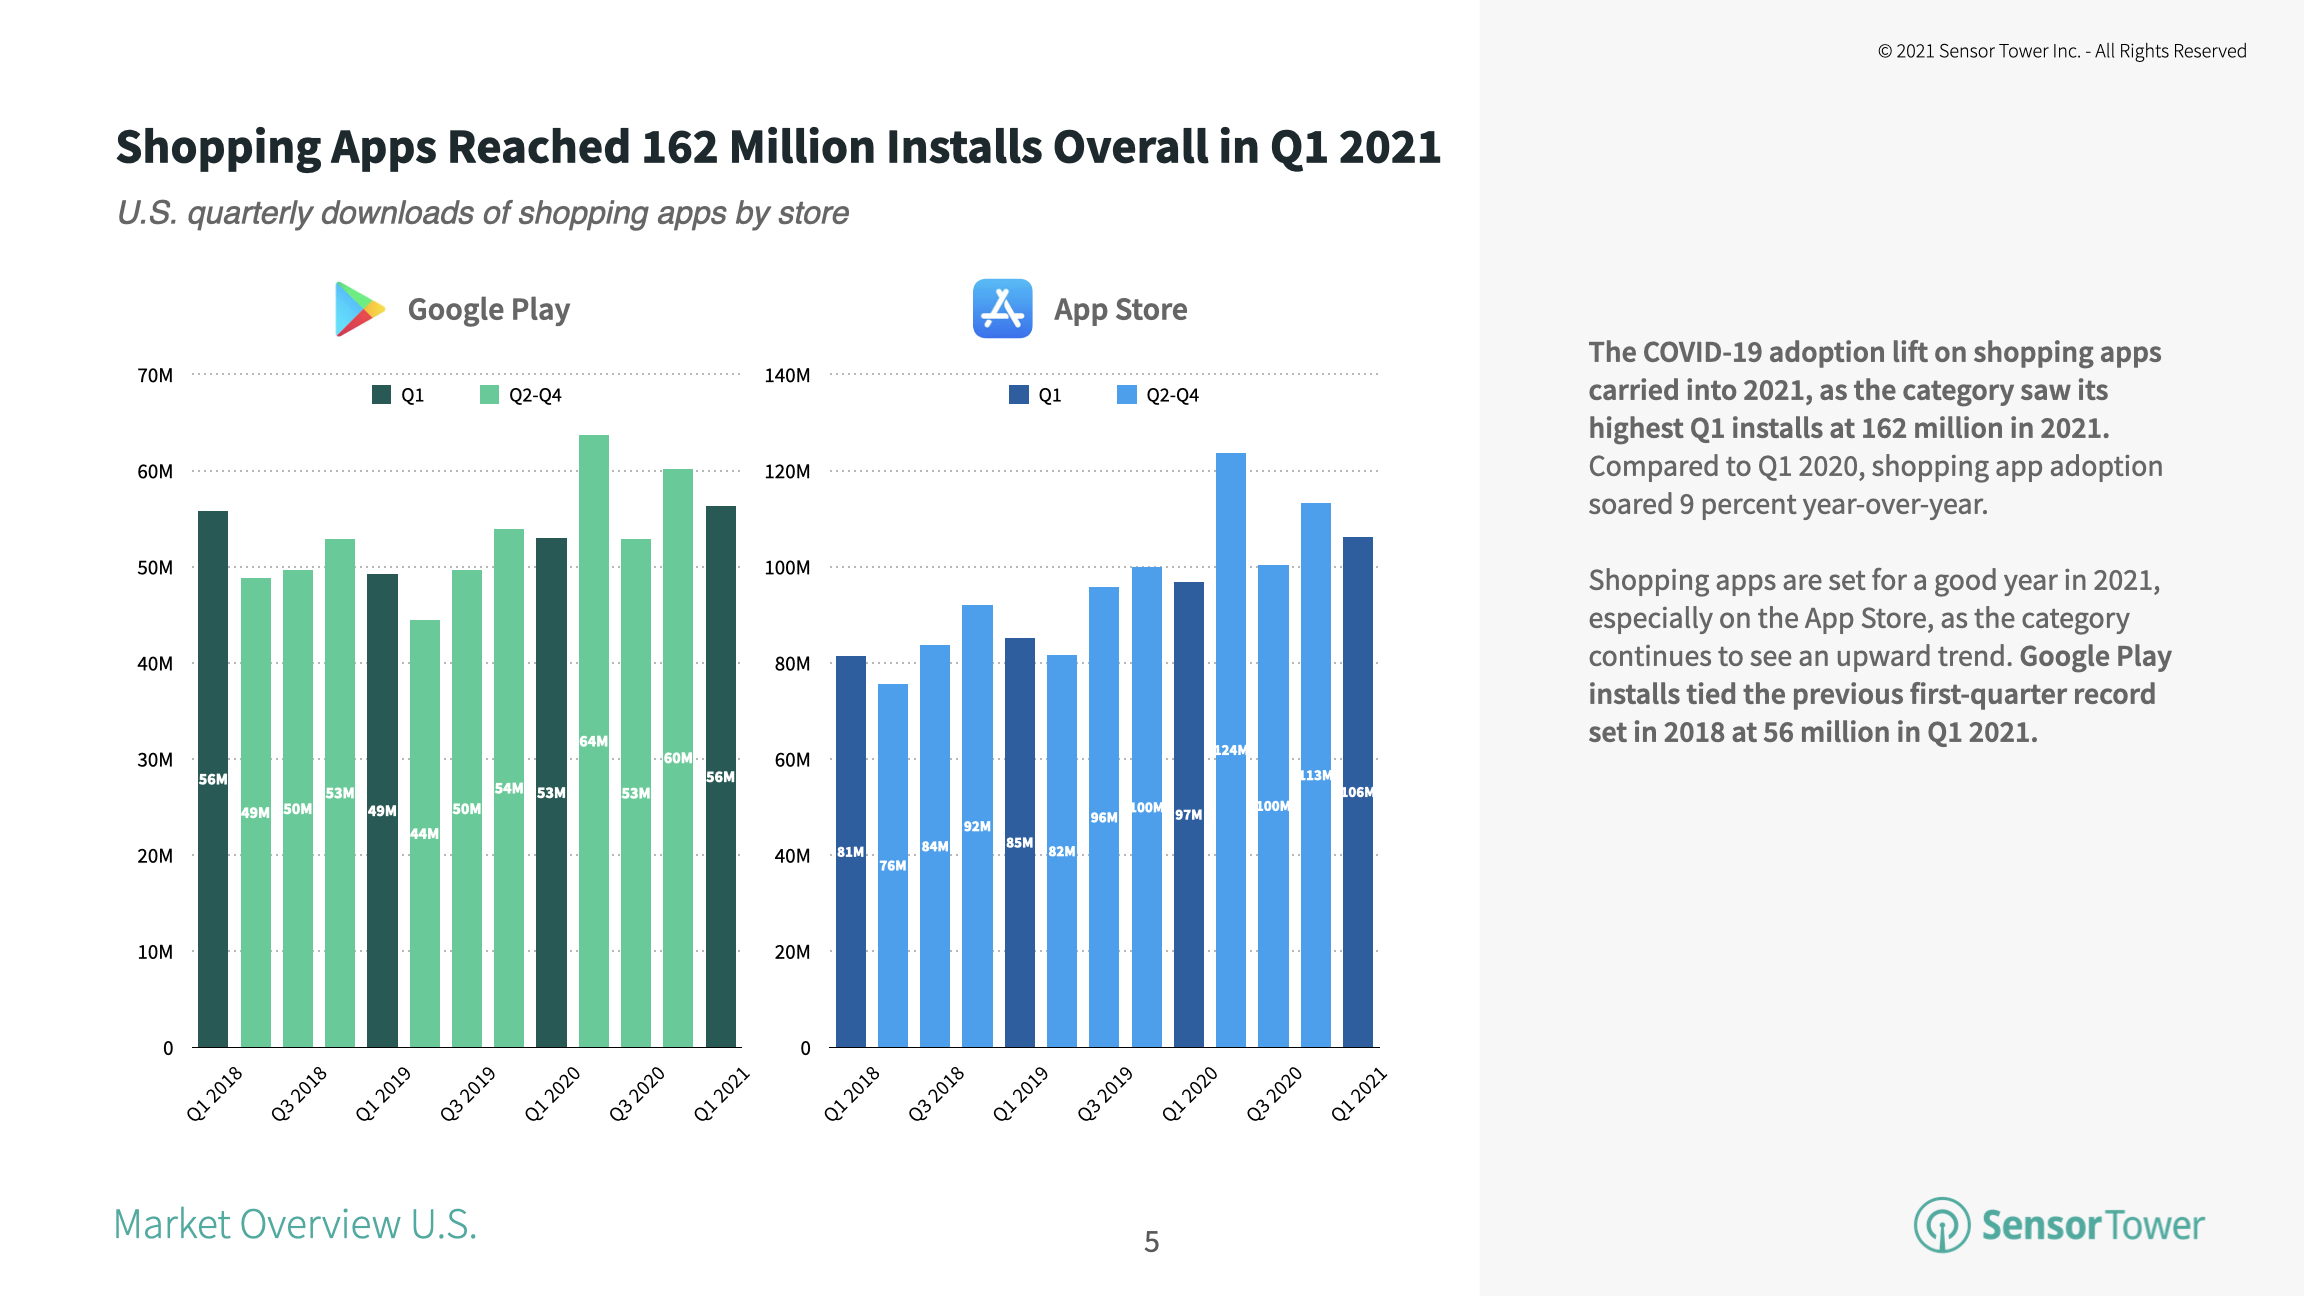 Marketplace apps accounted for 33 percent market share of installs among the top 100 U.S. shopping apps in 1Q21.